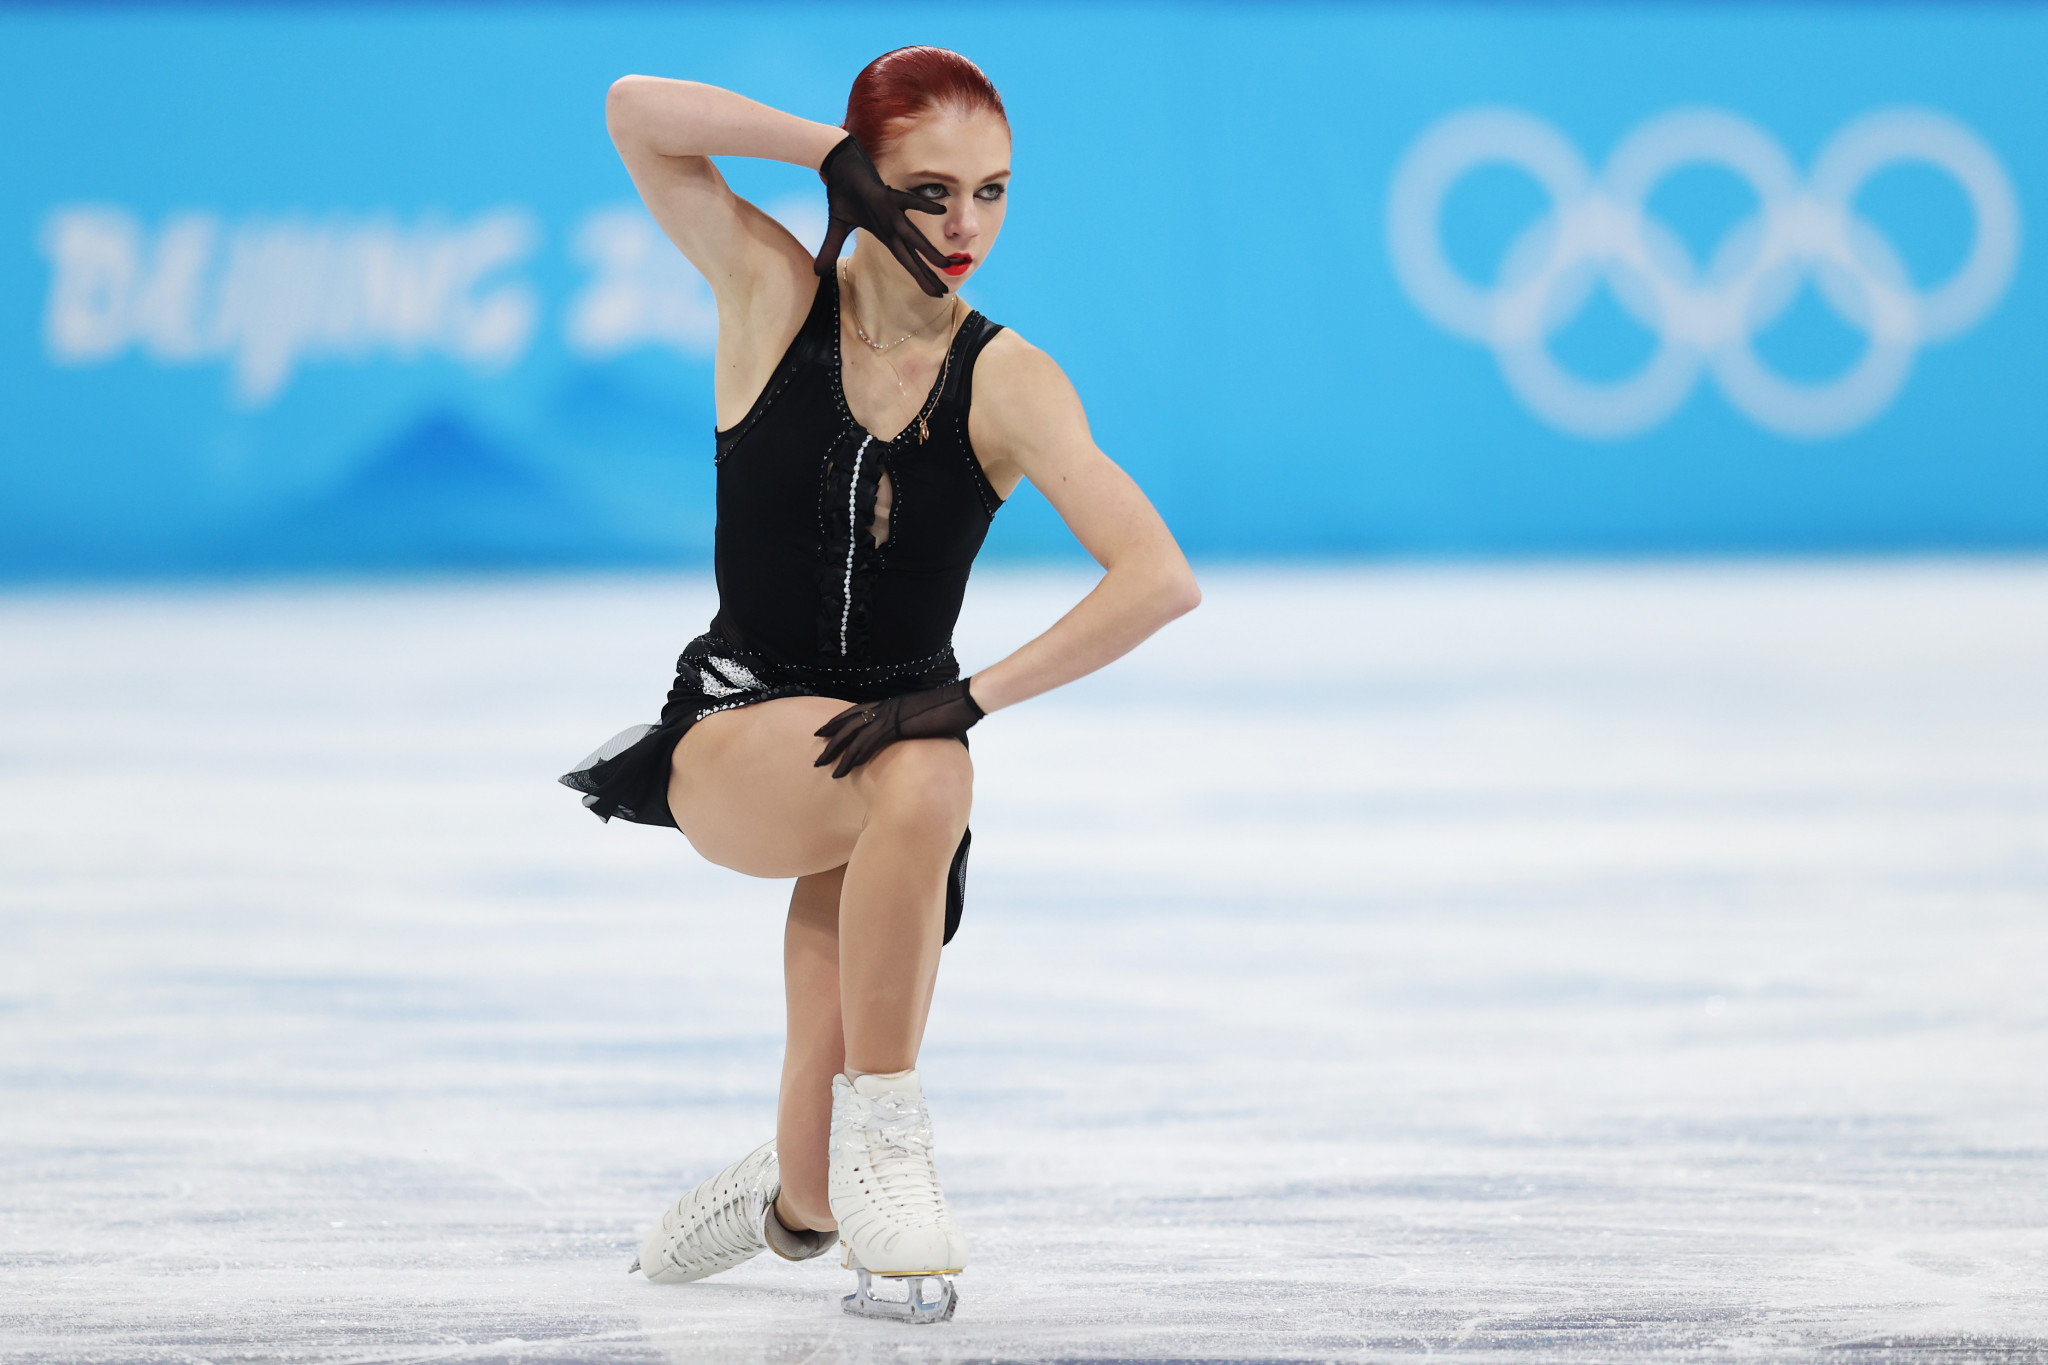 Alexandra Trusova suggested she may never skate again after finishing as the silver medallist ©Getty Images